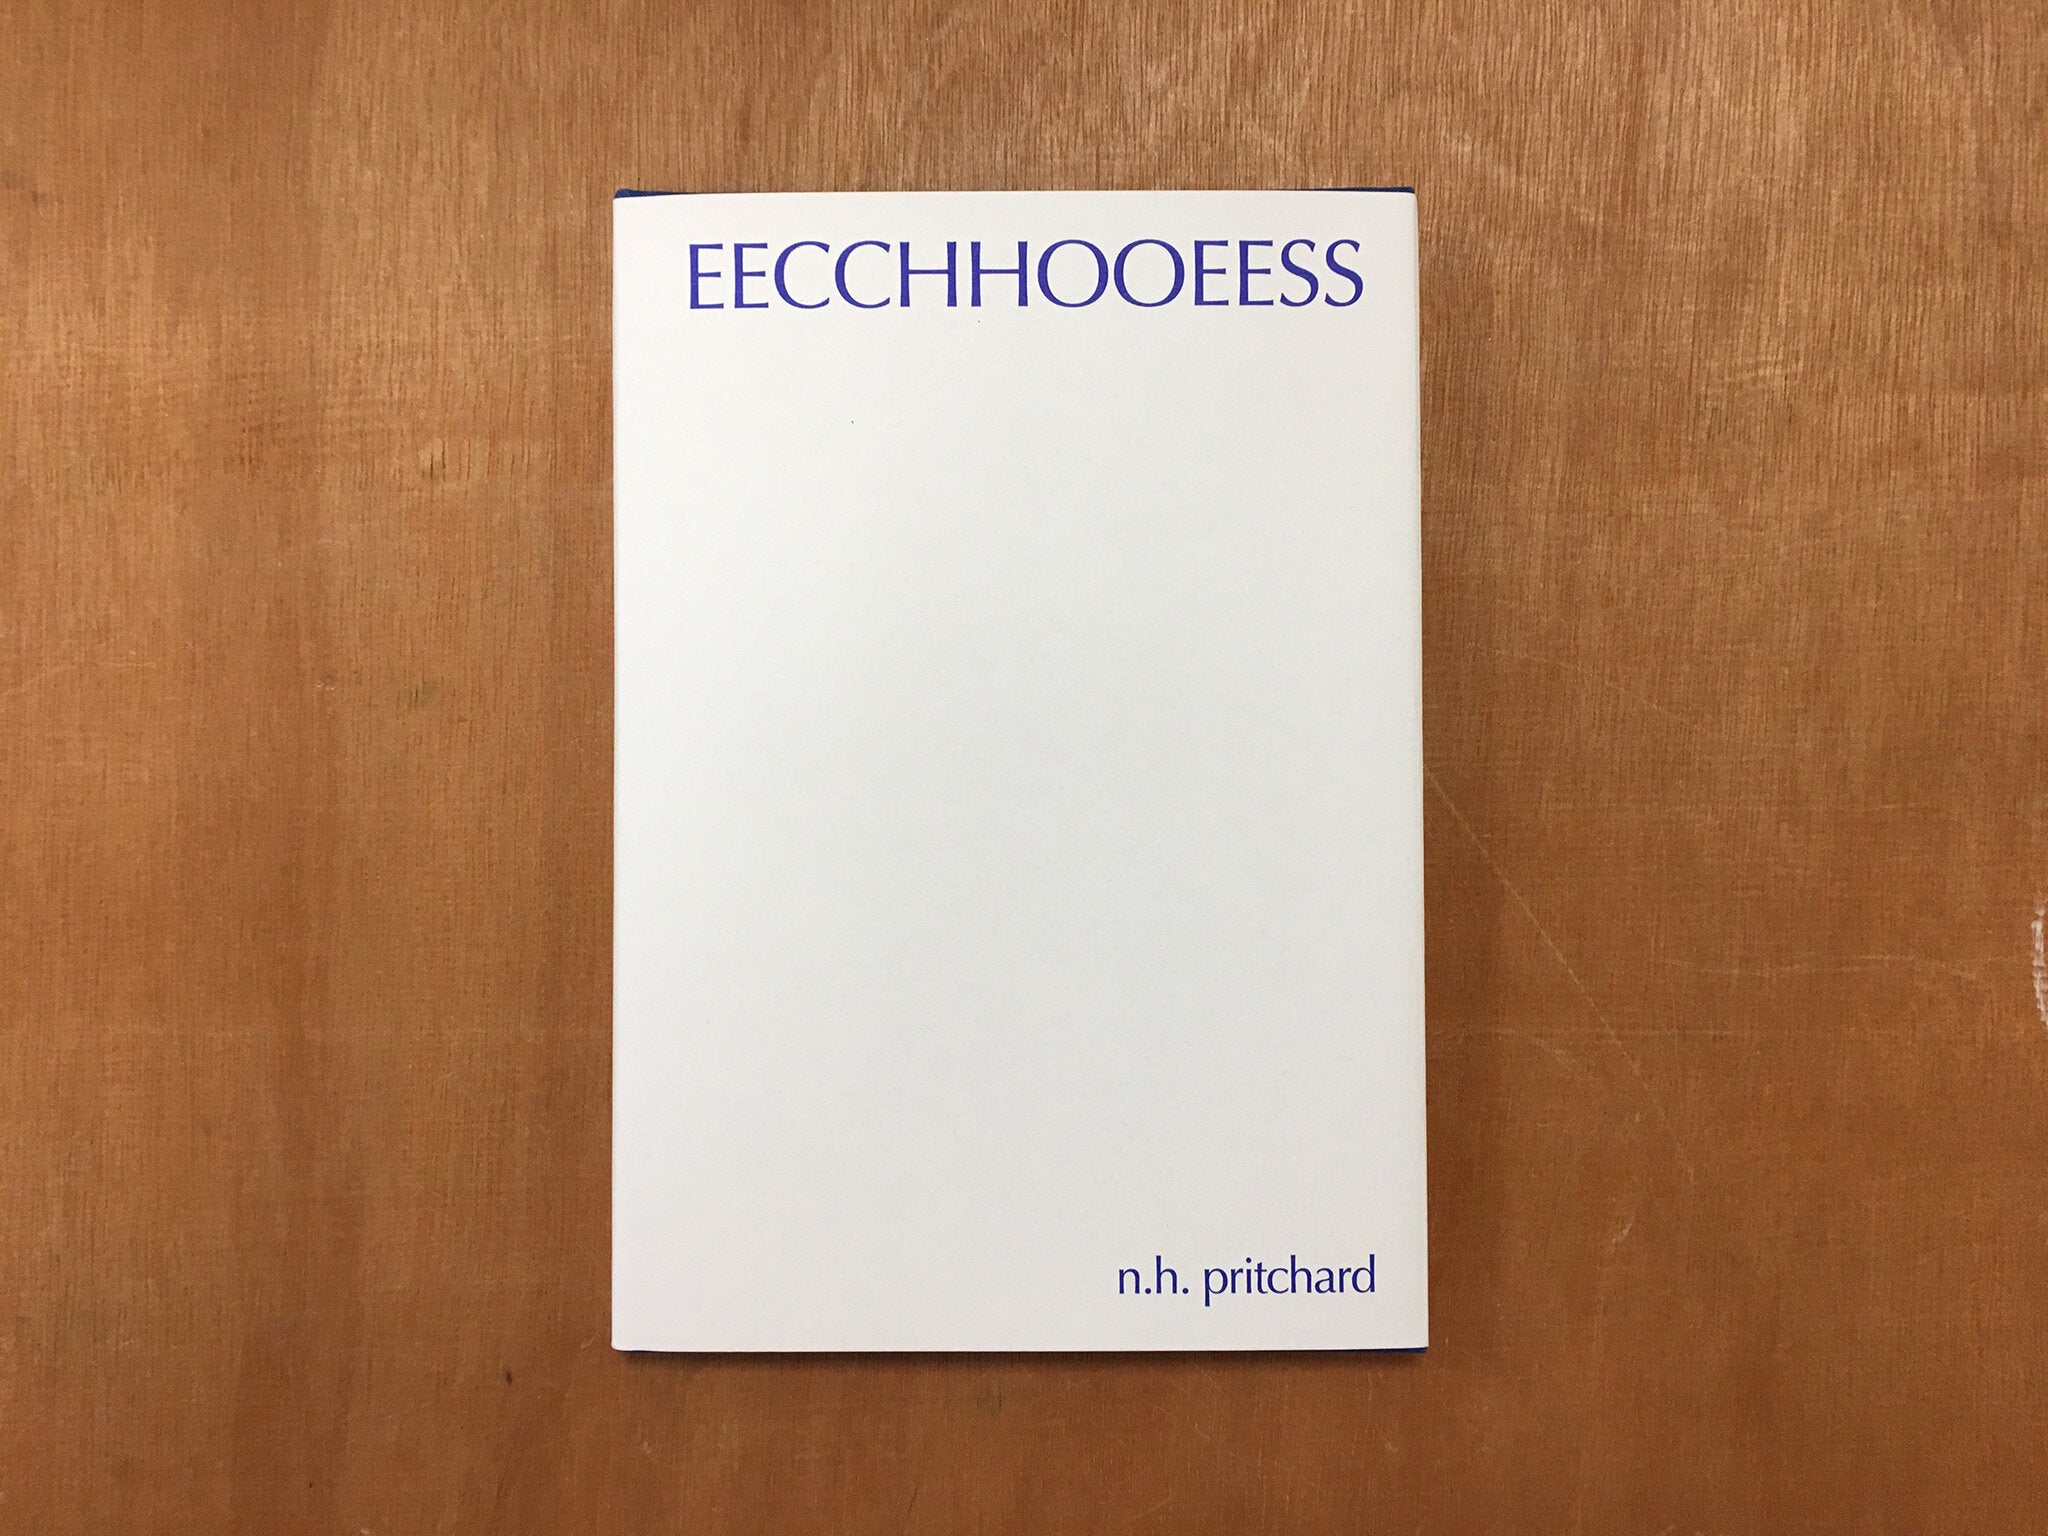 EECCHHOOEESS by Norman H. Pritchard